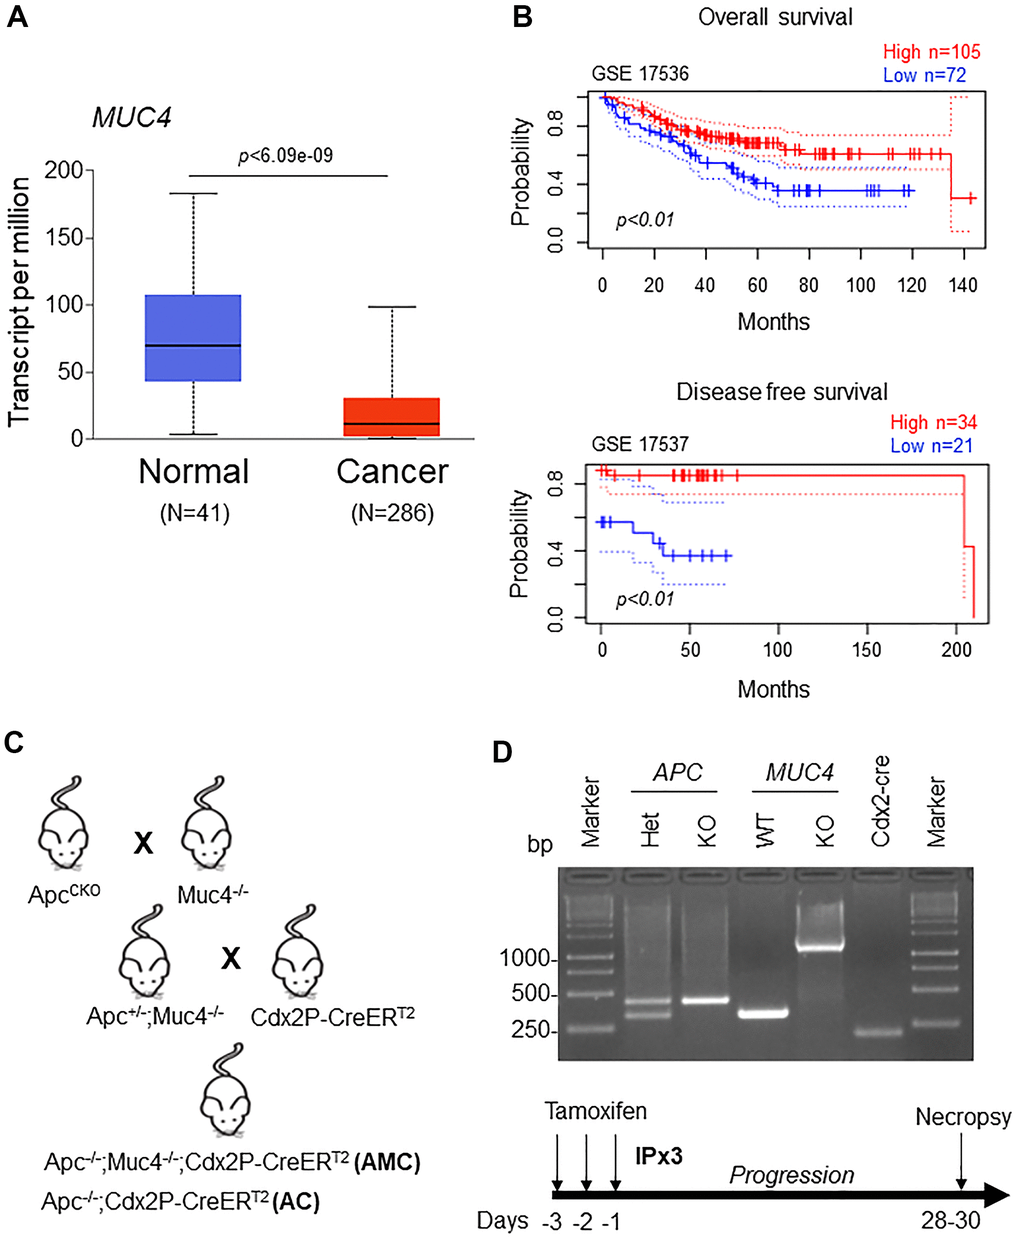 Low MUC4 expression is associated with poor survival in CRC patients. (A) A significant (p B) Increased expression of MUC4 is associated with better overall and disease-free survival in CRC patients’ data sets (GSE 17536 and GSE 17537). (C) Breeding strategy for the generation of a genetically engineered mouse model for Muc4-/- by crossing with Apcflox/flox mice. First-generation of double knockout (Apc-/-;Muc4-/-) animals were further crossed with inducible colon-specific Cre (Cdx2P-Cre ERT2) mice to get final cross (Apc-/-;Muc4-/-;Cdx2P-CreERT2, AMC) and its littermate controls (Apc-/-;Cdx2P-CreERT2, AC). (D) PCR products of Apc and Muc4 and Cdx2-cre animals of genomic DNA. Below, induction of Cre recombination by tamoxifen administration (75 mg/kg body weight, 3x) via intraperitoneally.